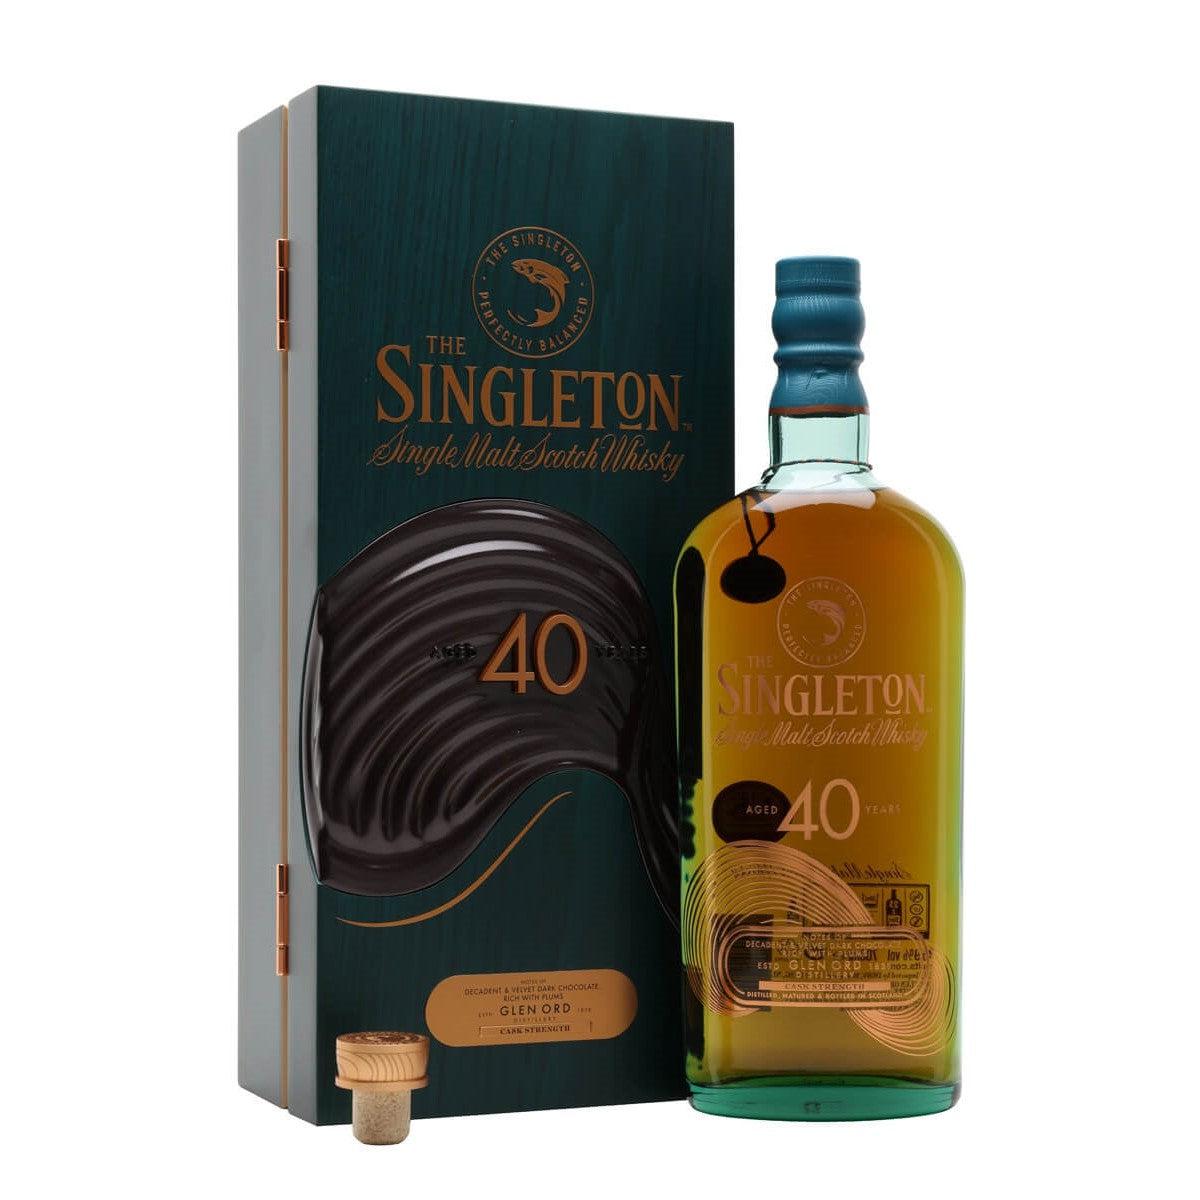 The Singleton of Glen Ord 40 Year Old Limited Edition Whisky 700ml